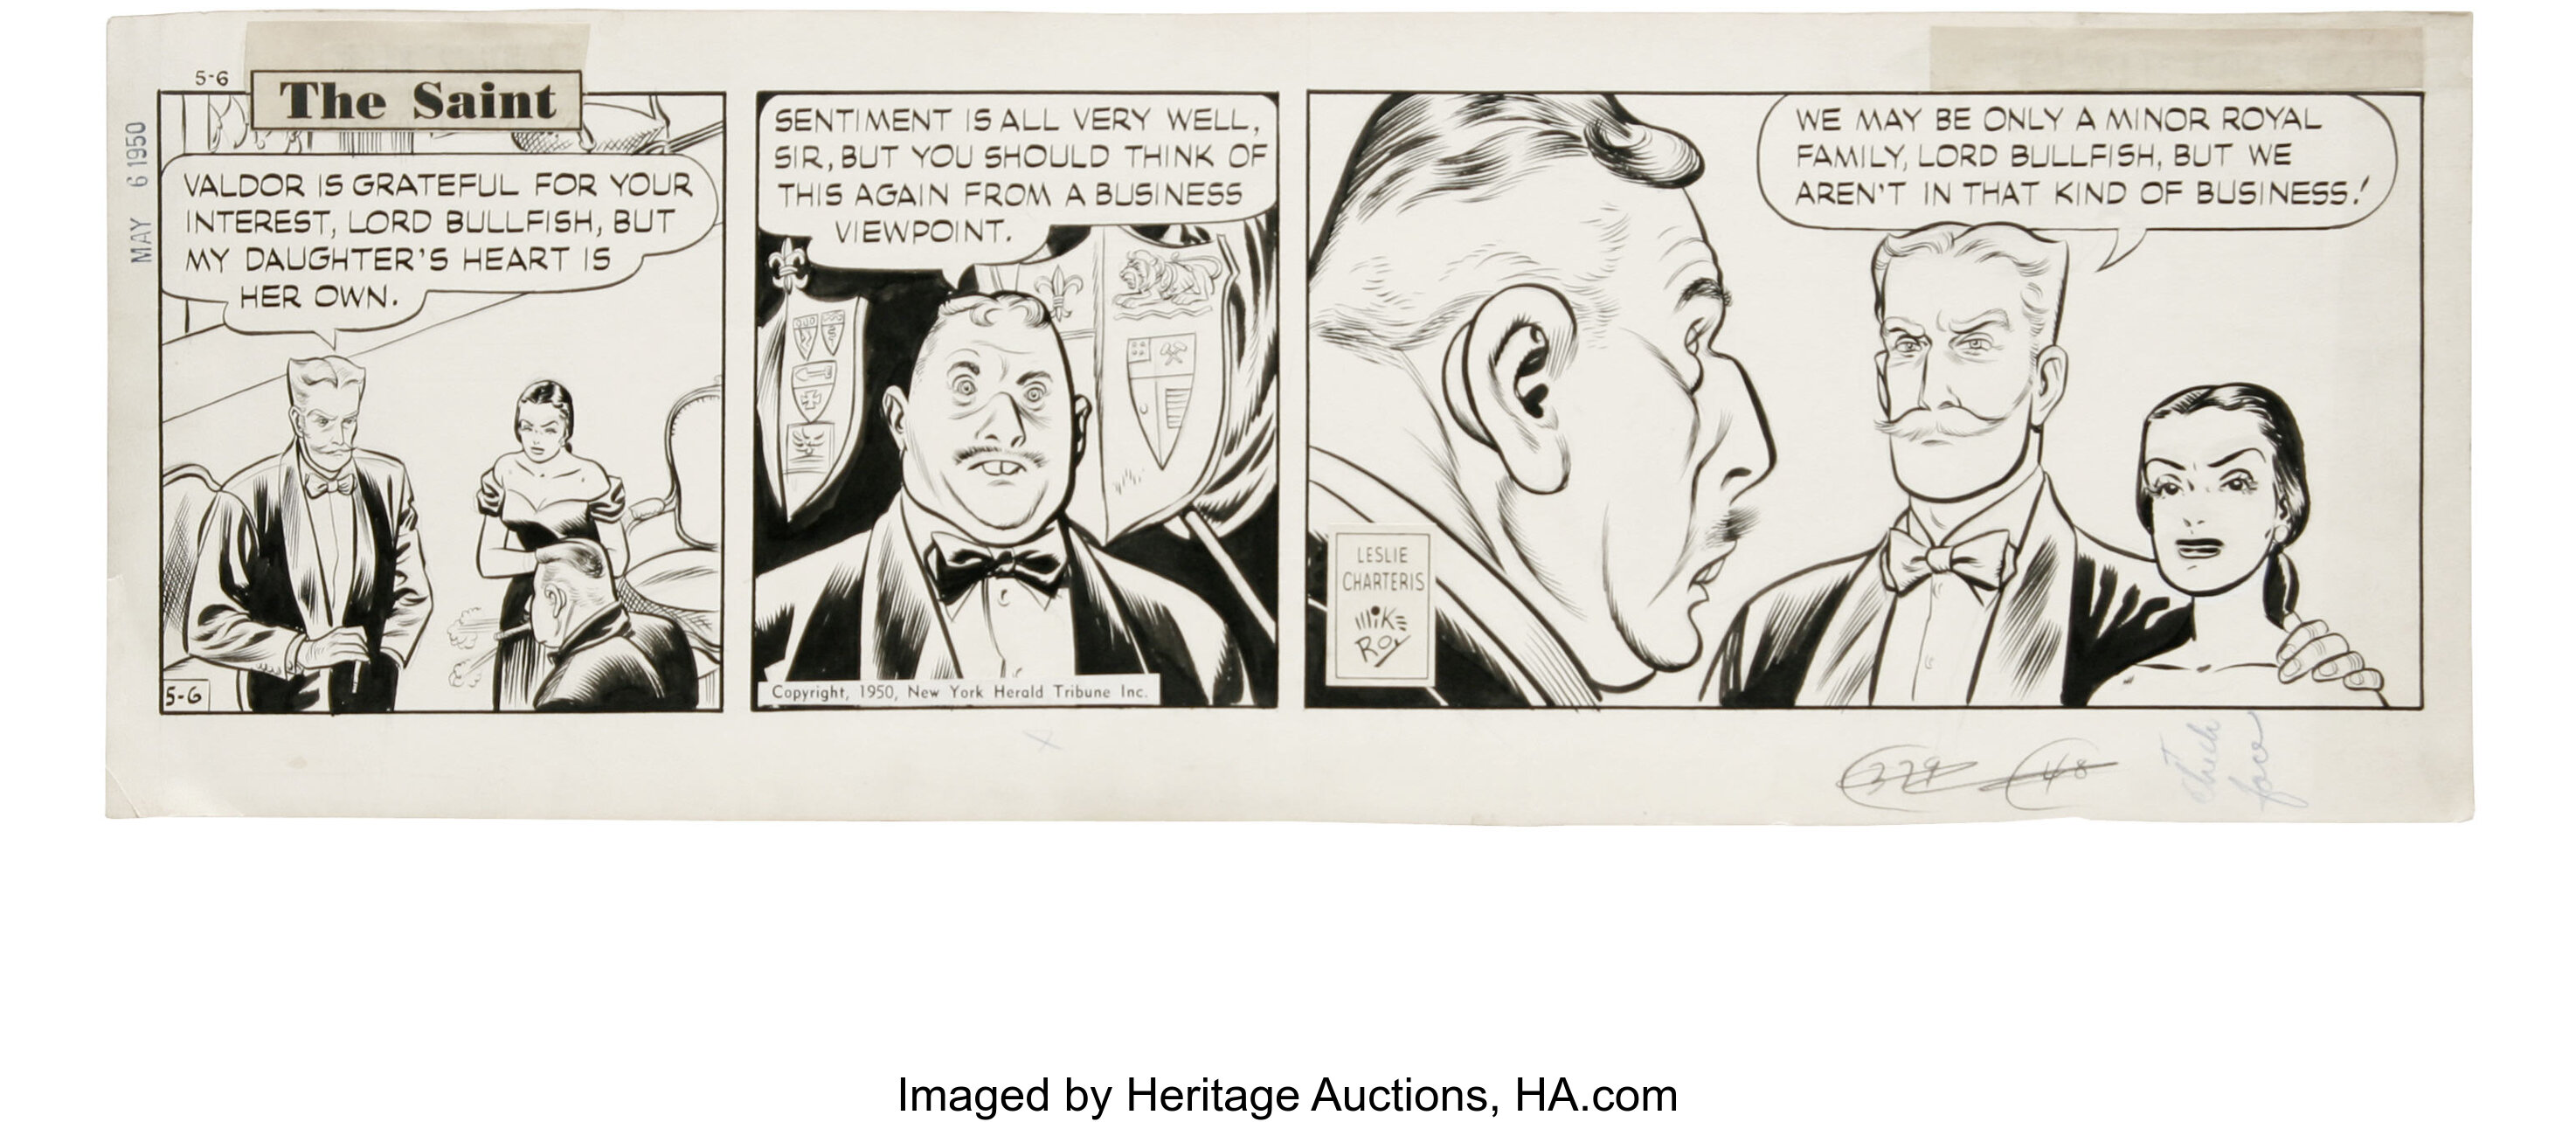 Mike Roy The Saint Daily Comic Strip Original Art Dated 5 6 50 Lot Heritage Auctions